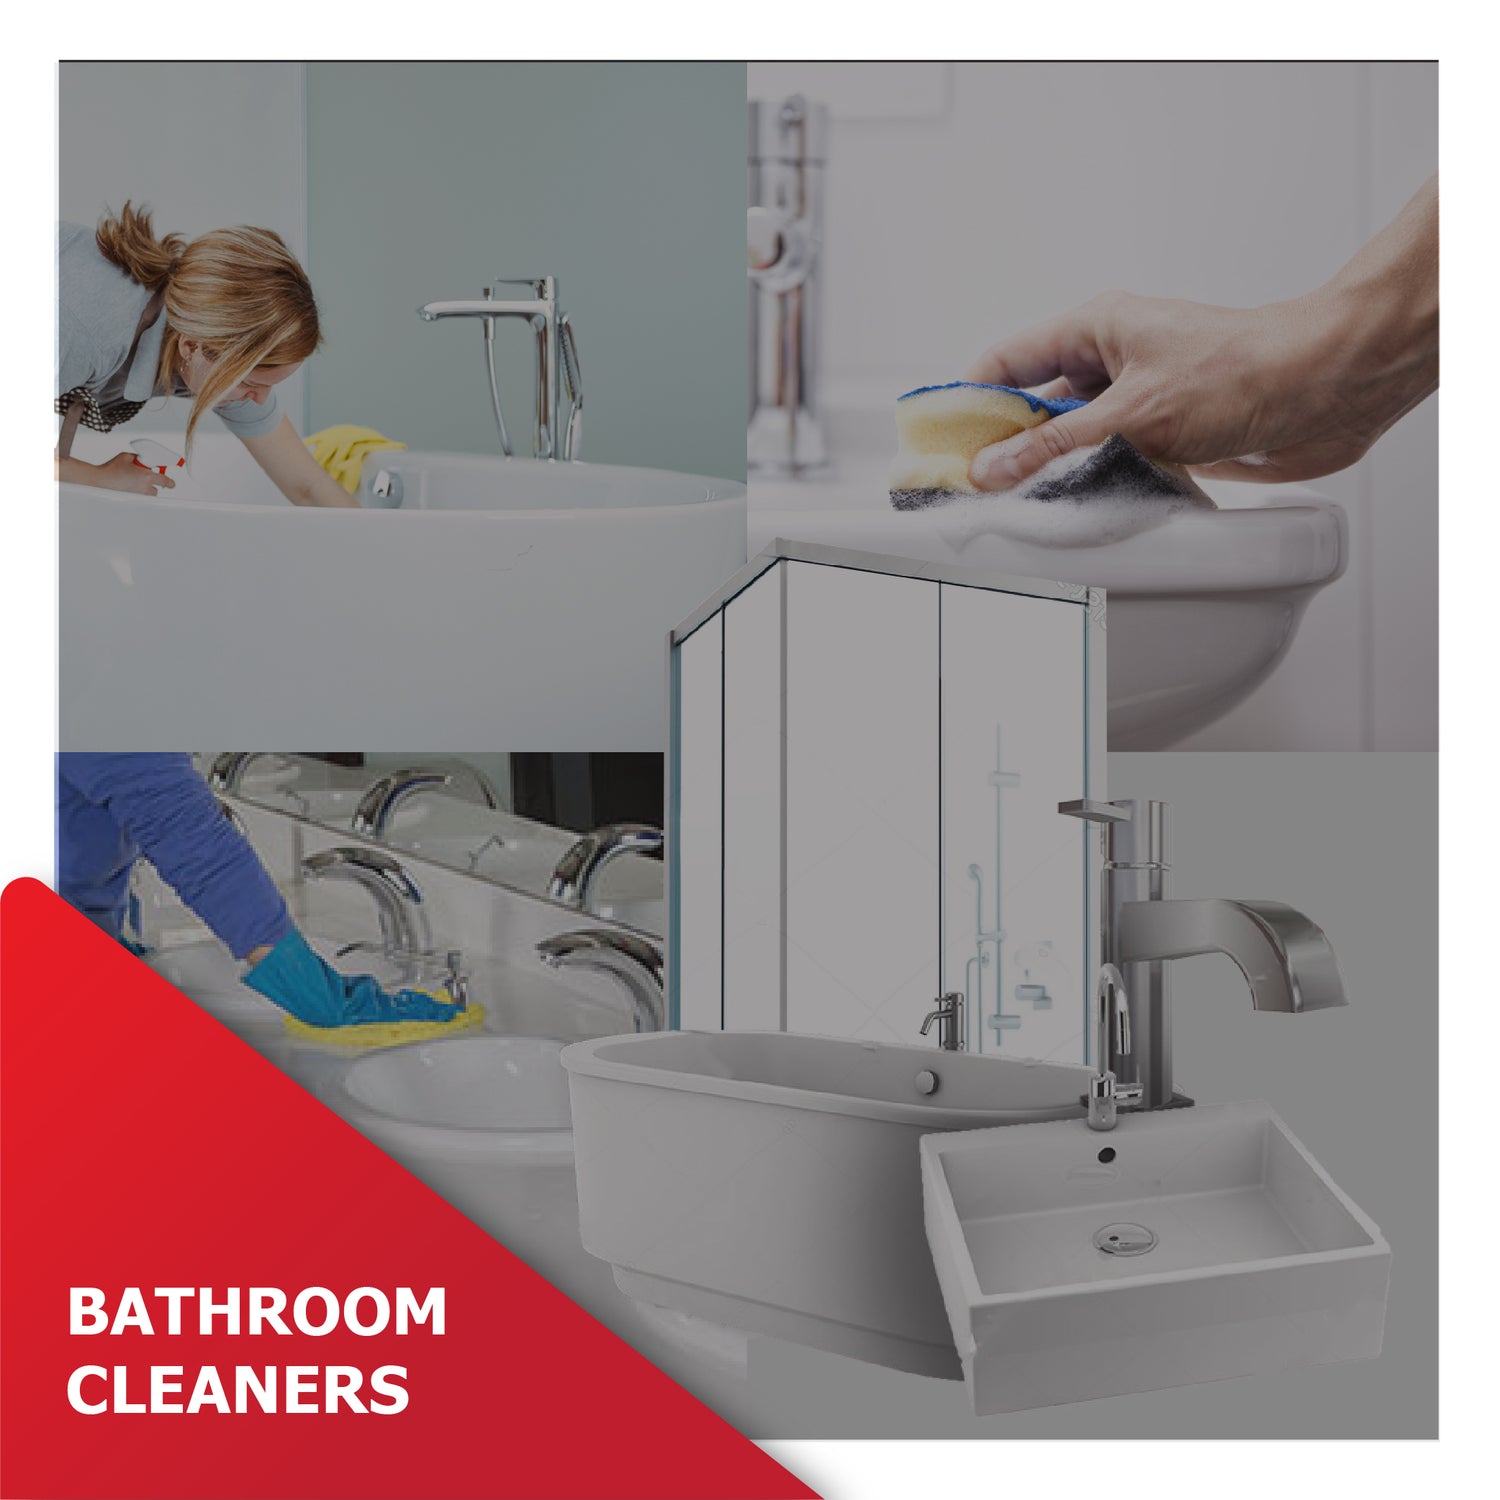 Bathroom Cleaners | Category